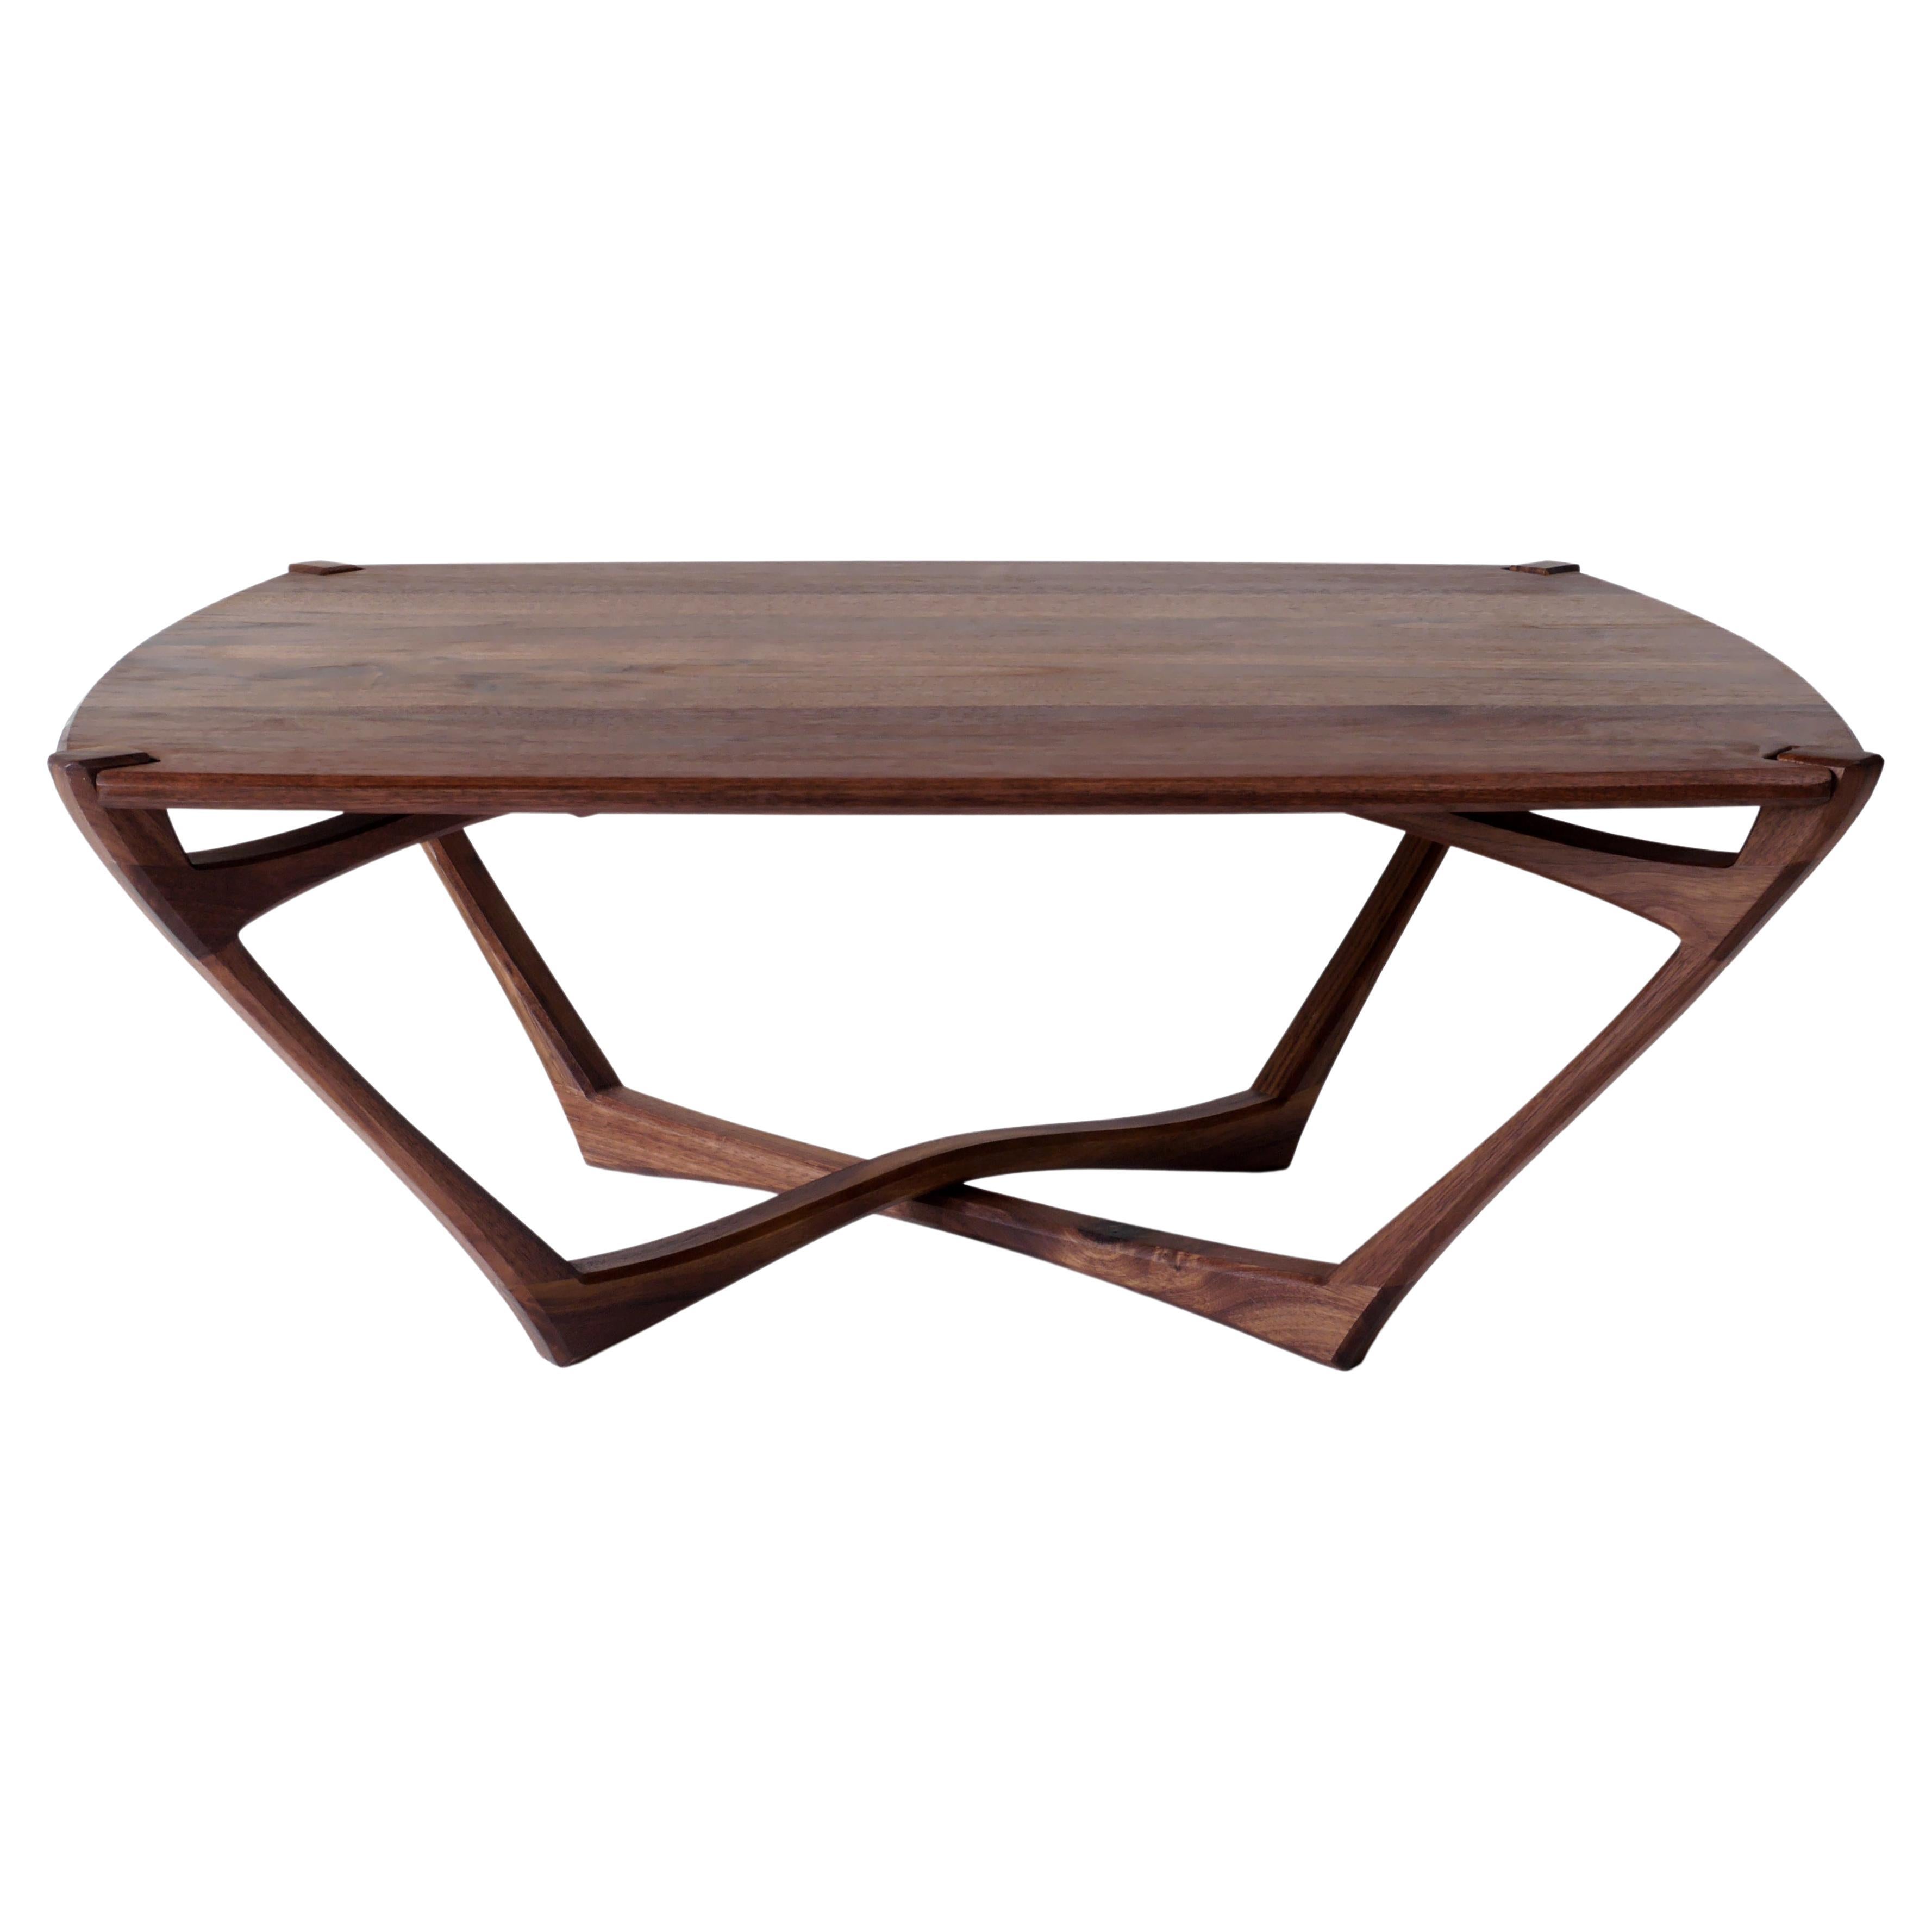 Walnut Mistral Coffee Table, Modern Sculptural Living Room Table by Arid For Sale